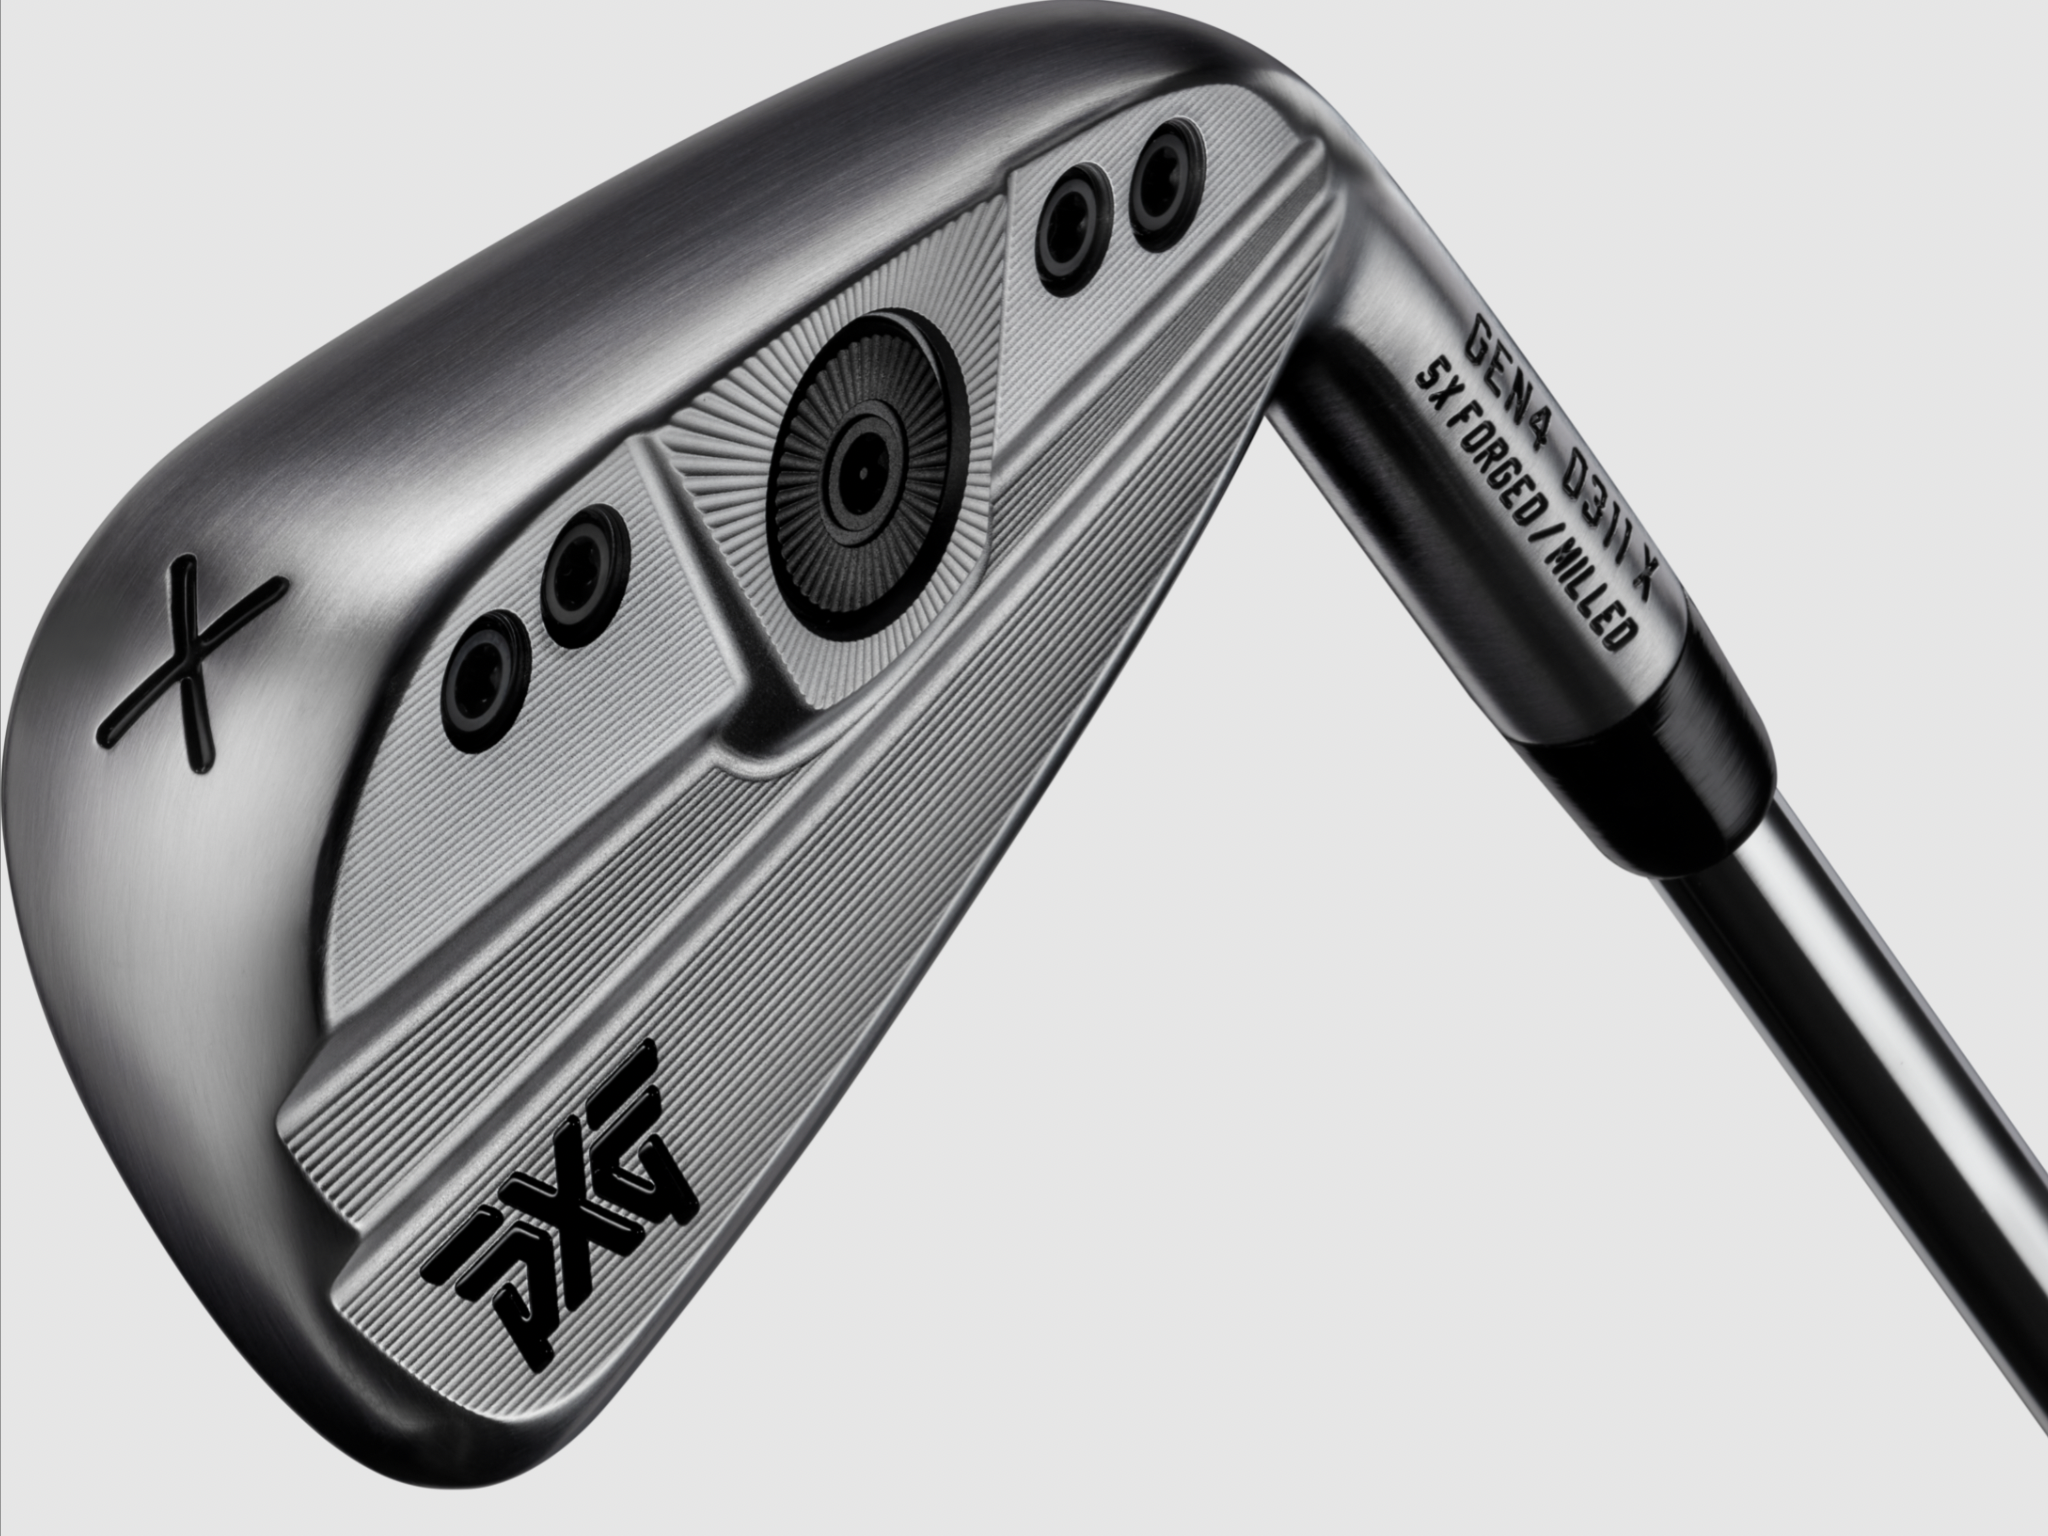 Schedule Appointment with PXG